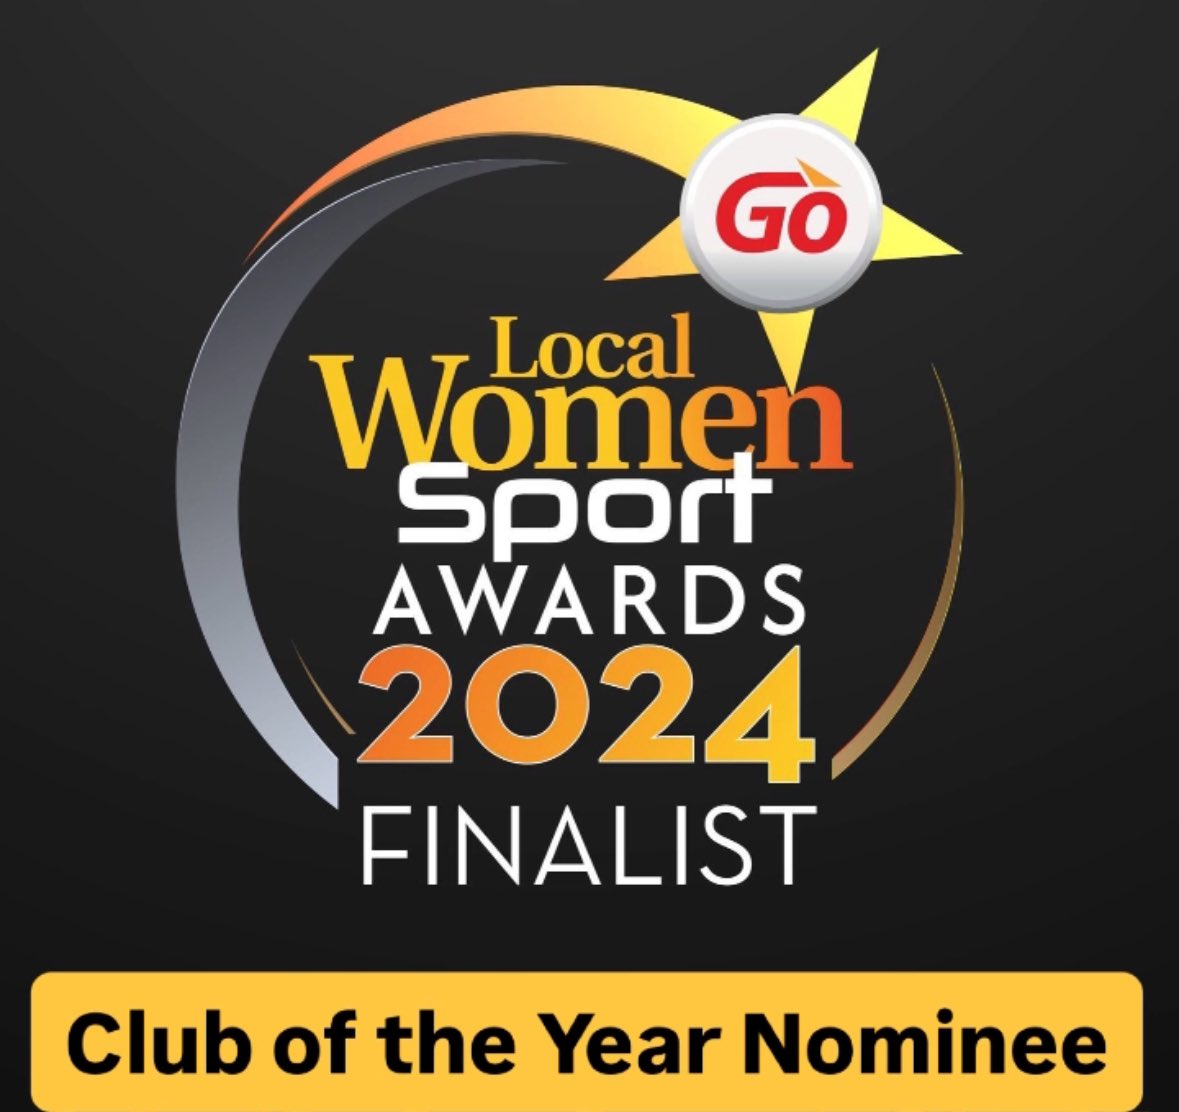 We’re at the @LOCALWOMENSPORT Awards 2024 tonight! Looking forward to a great night with a great bunch of sports lovers! We’ve been nominated for Club of the Year amongst some other amazing contenders - we will keep you posted! 💛🖤 #Together #LeChéile #Thegither